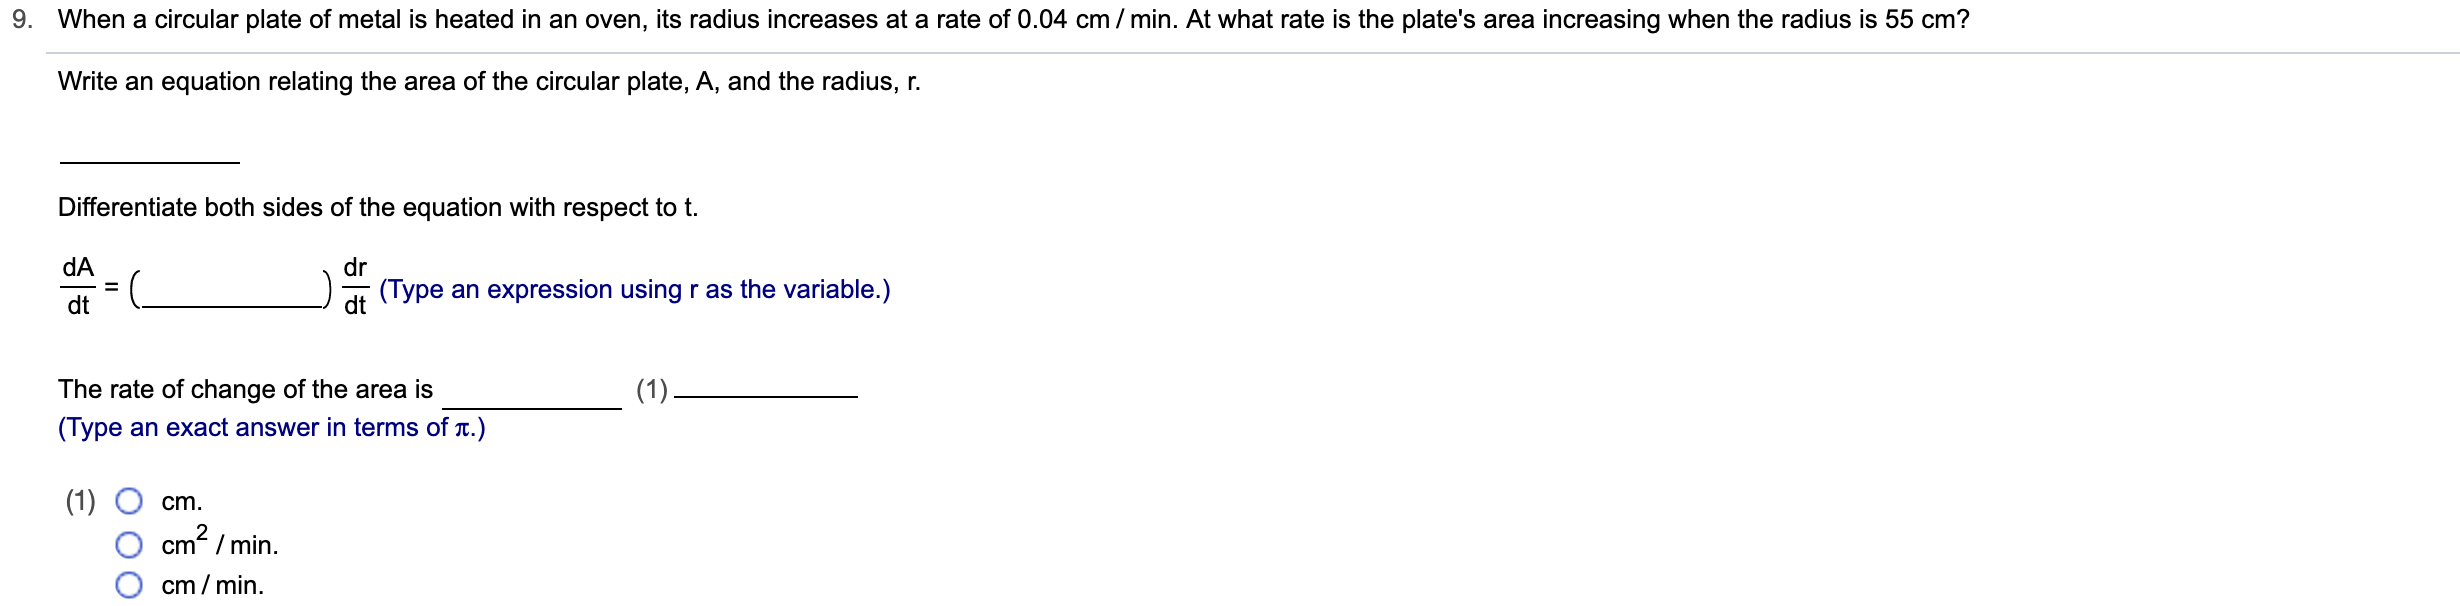 When a circular plate of metal is heated in an oven, its radius increases at a rate of 0.04 cm / min. At what rate is the plate's area increasing when the radius is 55 cm?
Write an equation relating the area of the circular plate, A, and the radius, r
Differentiate both sides of the equation with respect to t.
dA
dr
(Type an expression using r as the variable.)
dt
The rate of change of the area is
(1)
(Type an exact answer in terms of t.)
(1)
cm2/min
cm
cm/min
